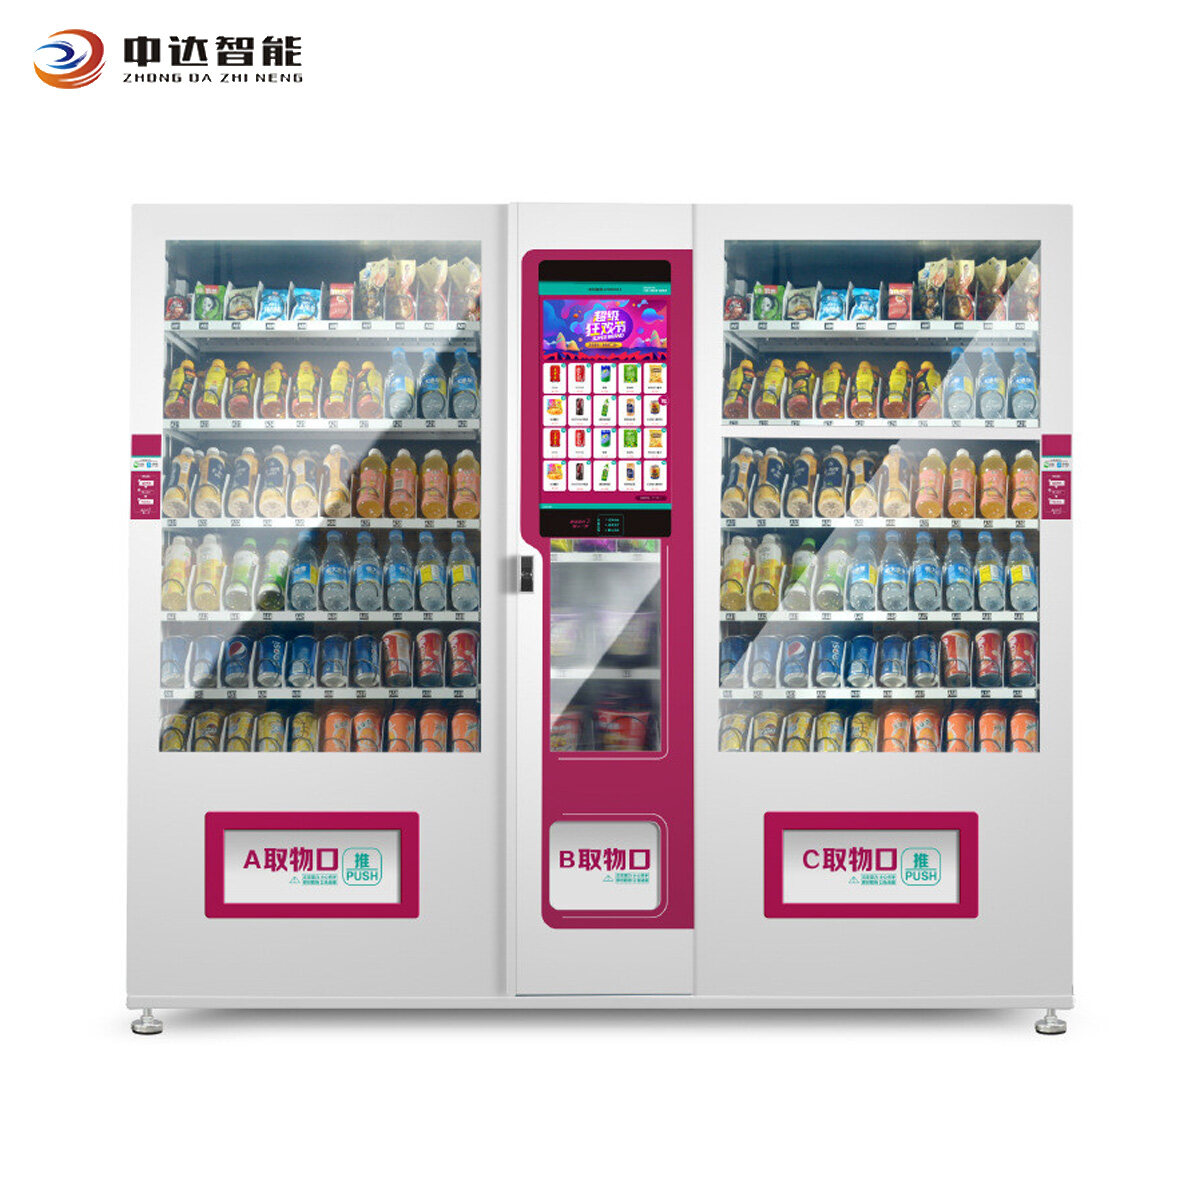 touch screen vending machine with snacks